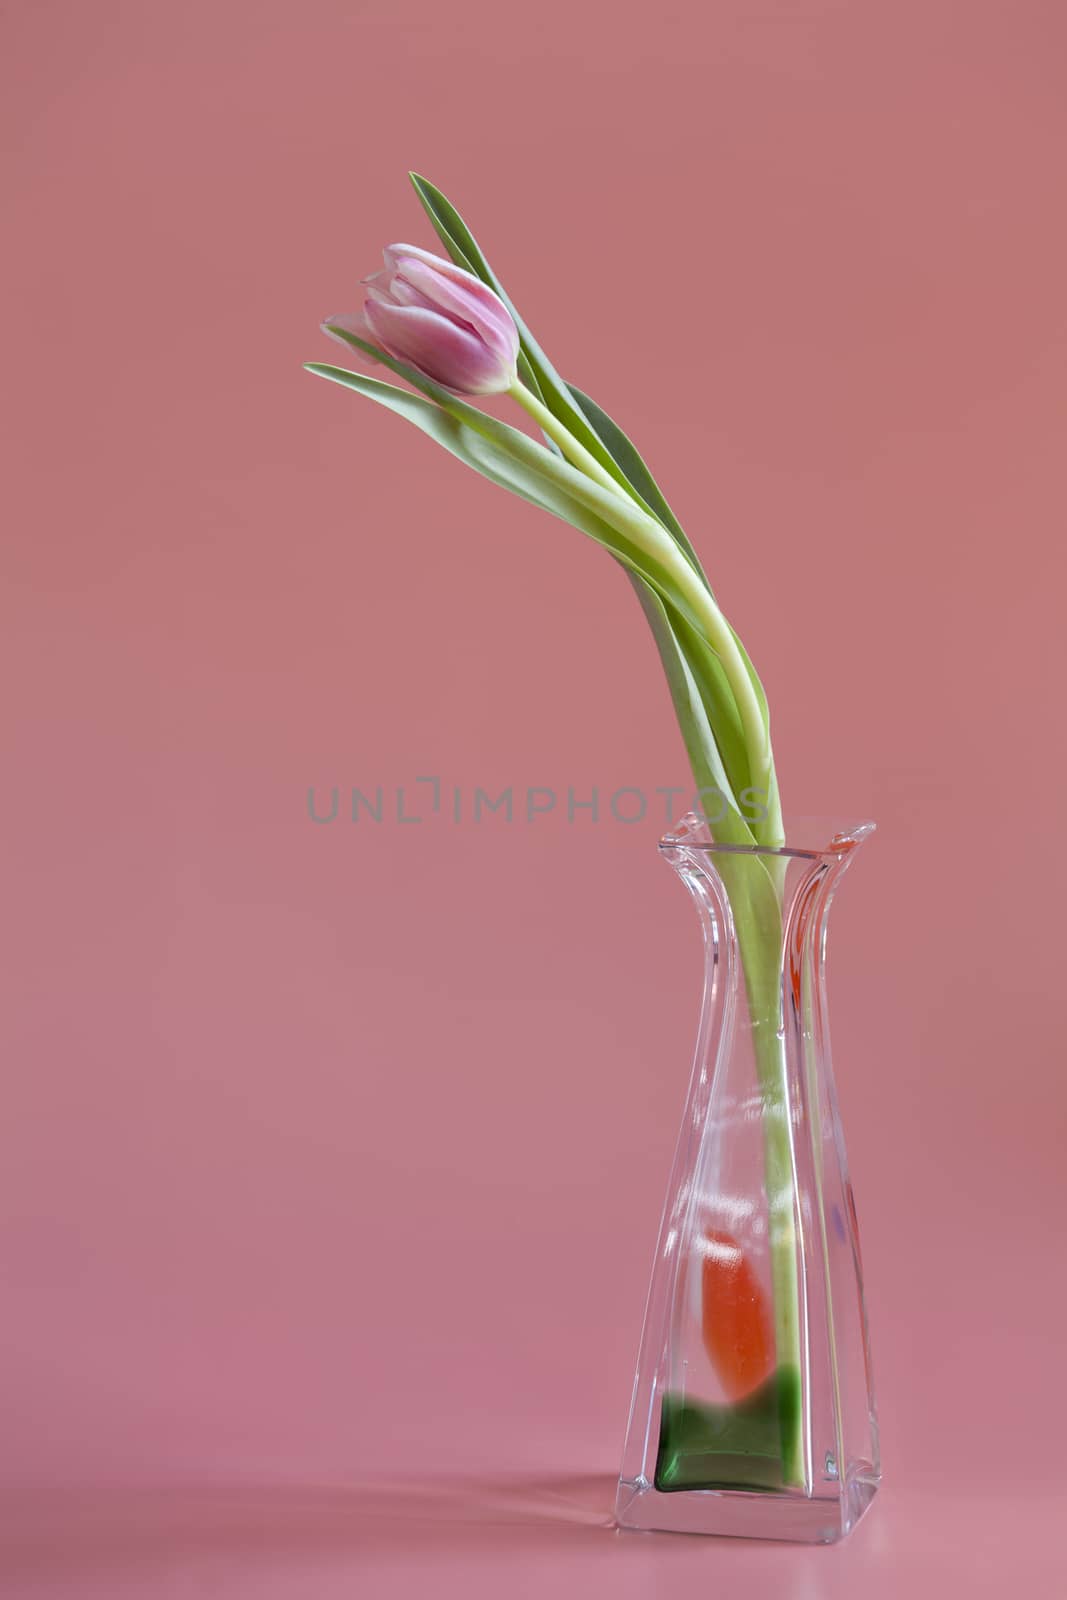 One Pink tulip with glass vase by mrivserg